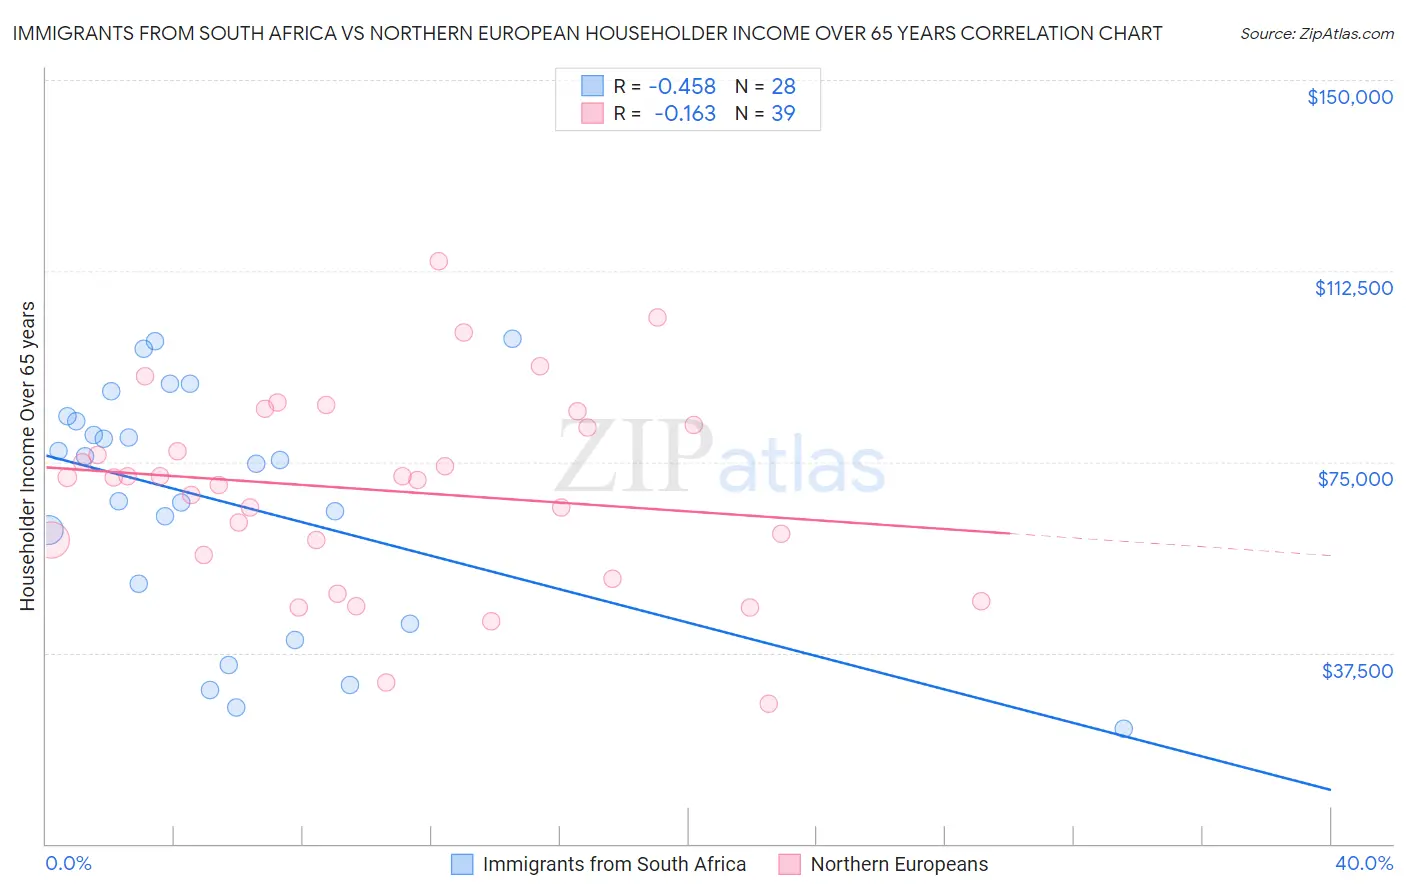 Immigrants from South Africa vs Northern European Householder Income Over 65 years